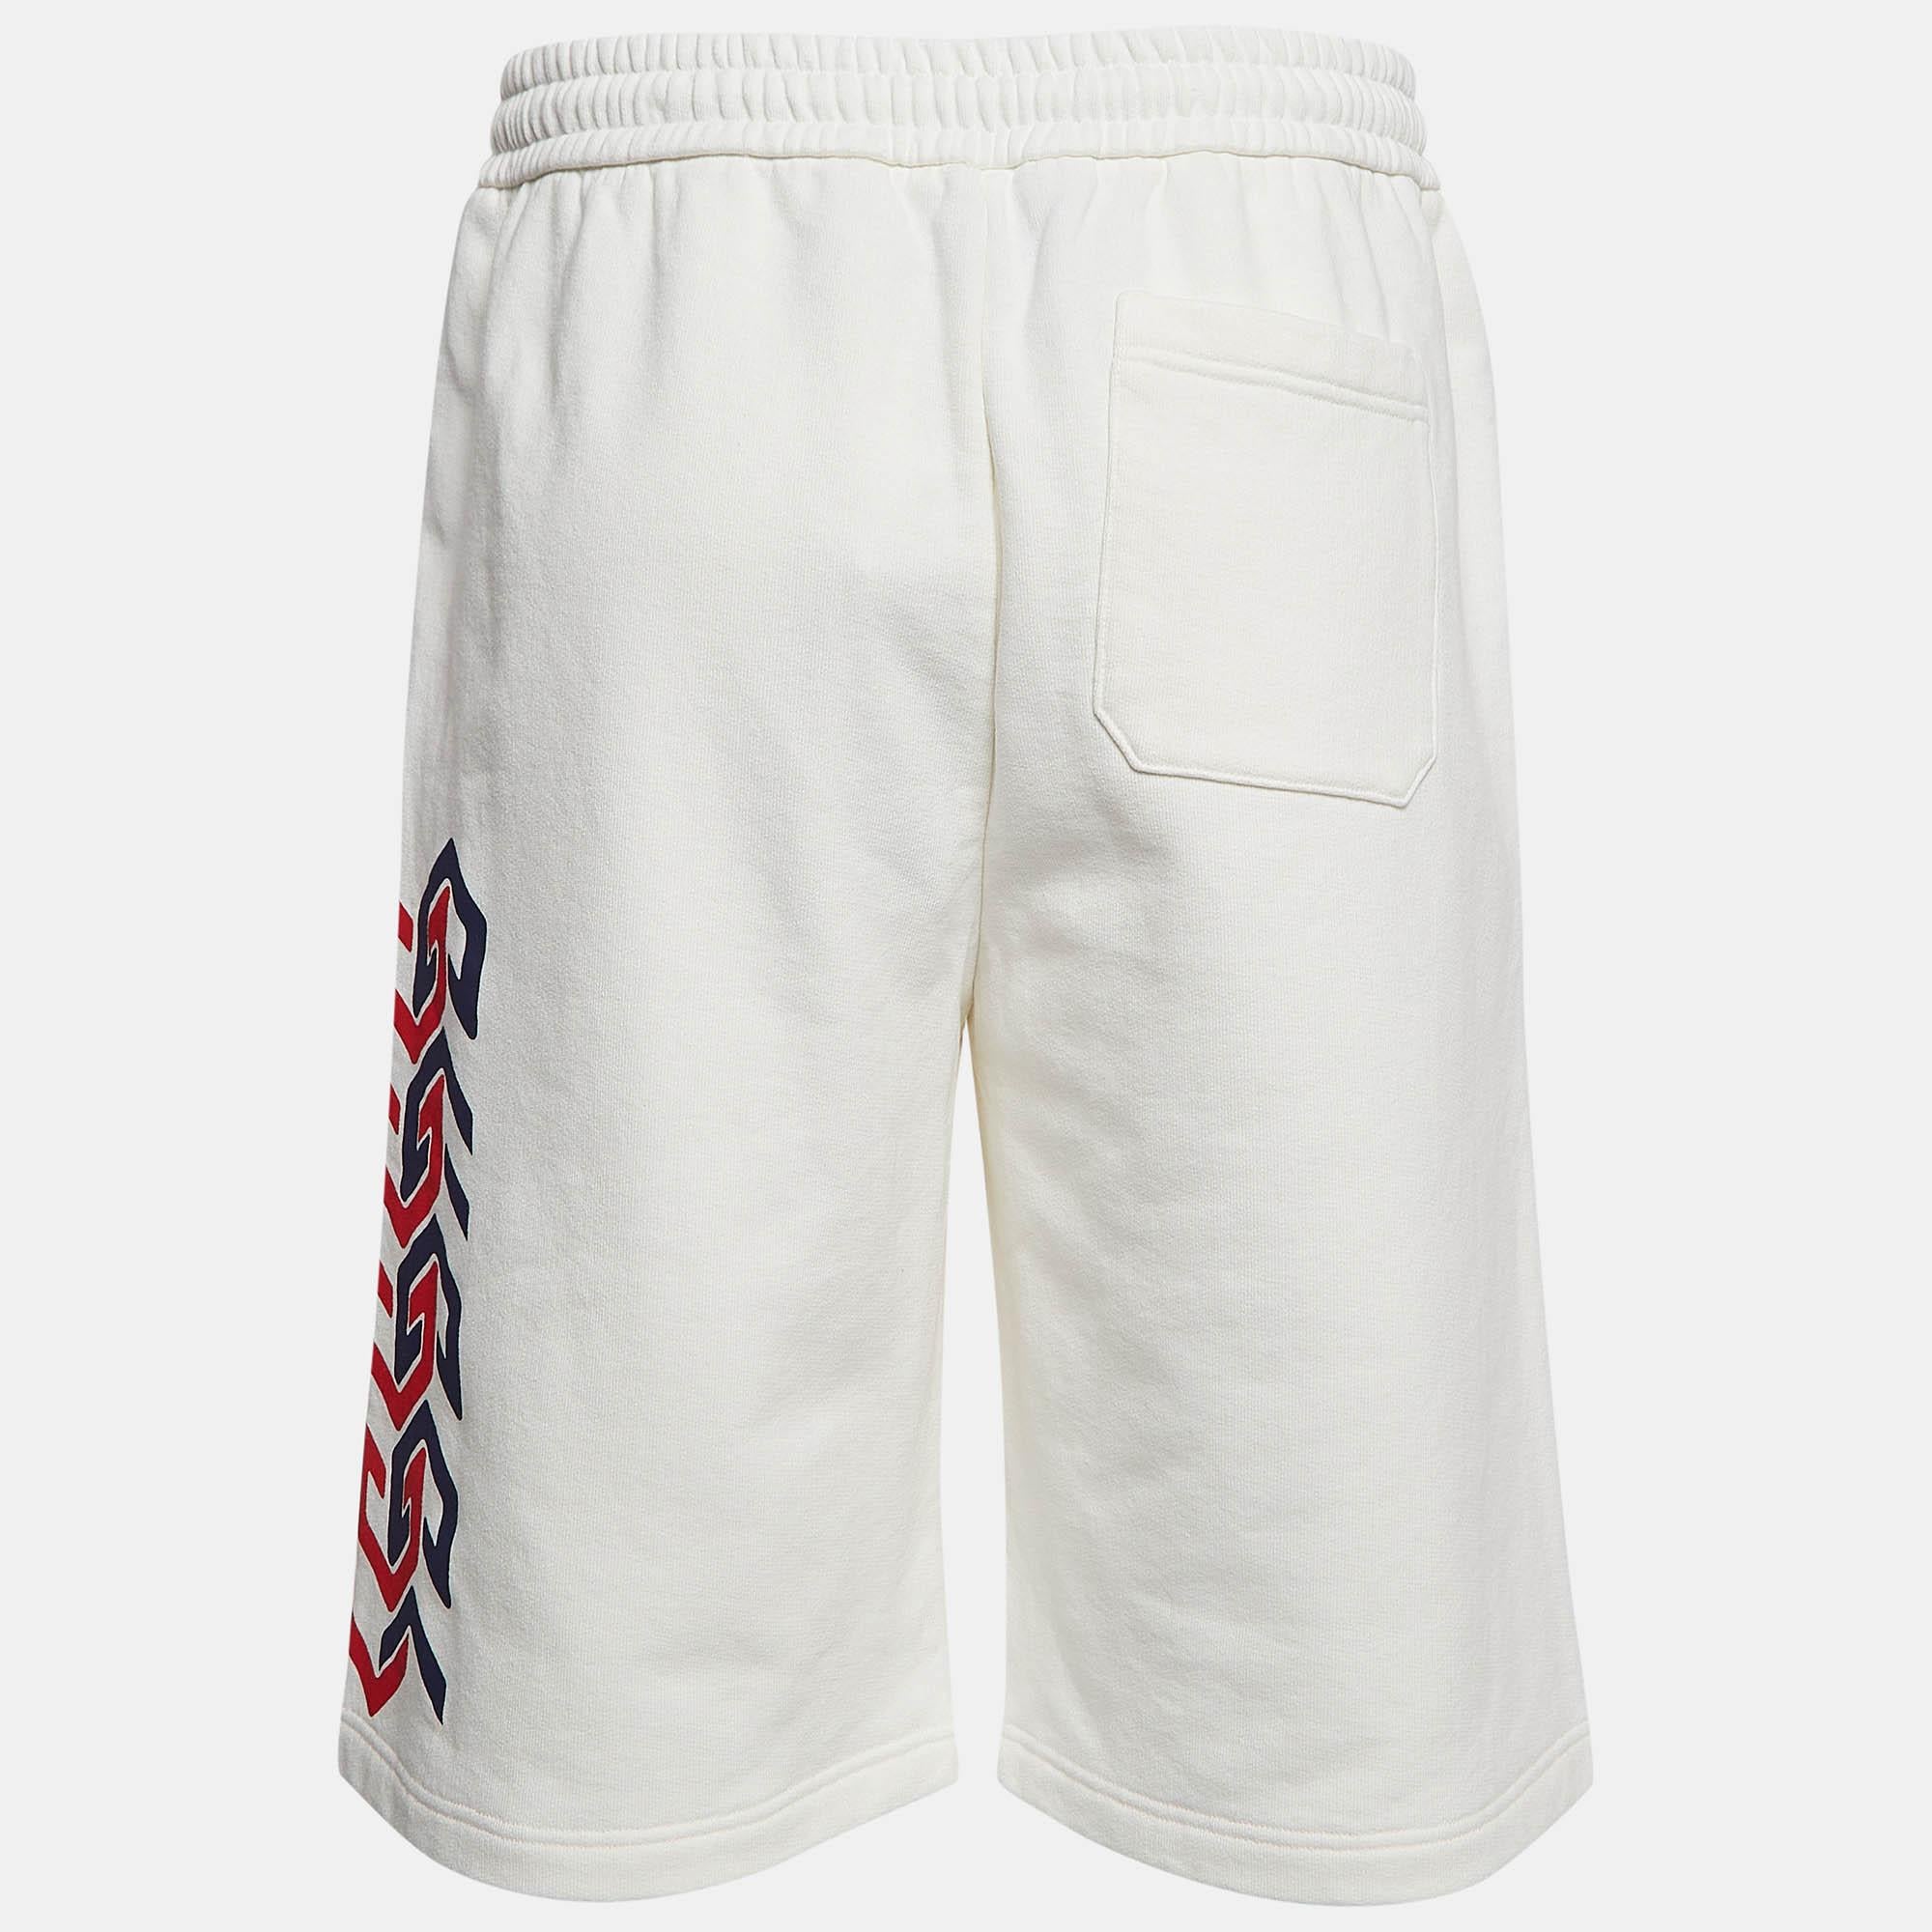 Beachy vacations call for a stylish pair of shorts like this. Stitched using high-quality fabric, this pair of shorts is styled with classic details and has a superb length. Wear it with T-shirts.

Includes: Info Booklet, Original Cover